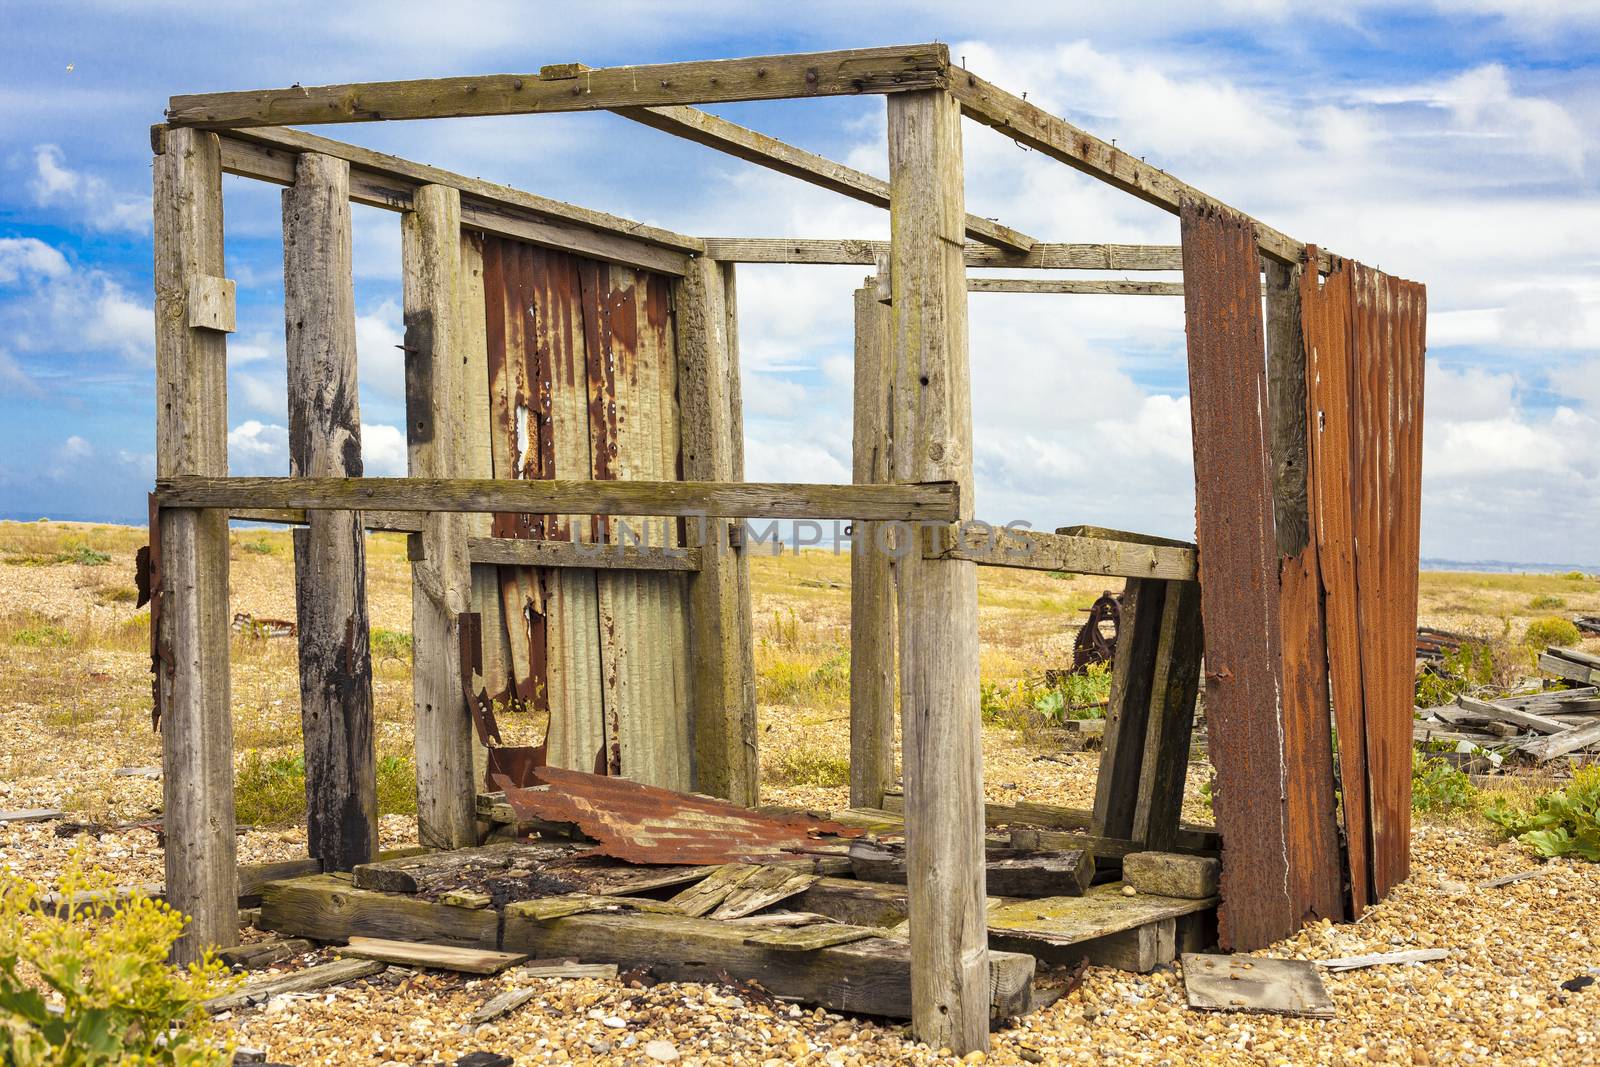 Abandoned fishing hut or old wooden cabin on south coast of England in Dungeness.